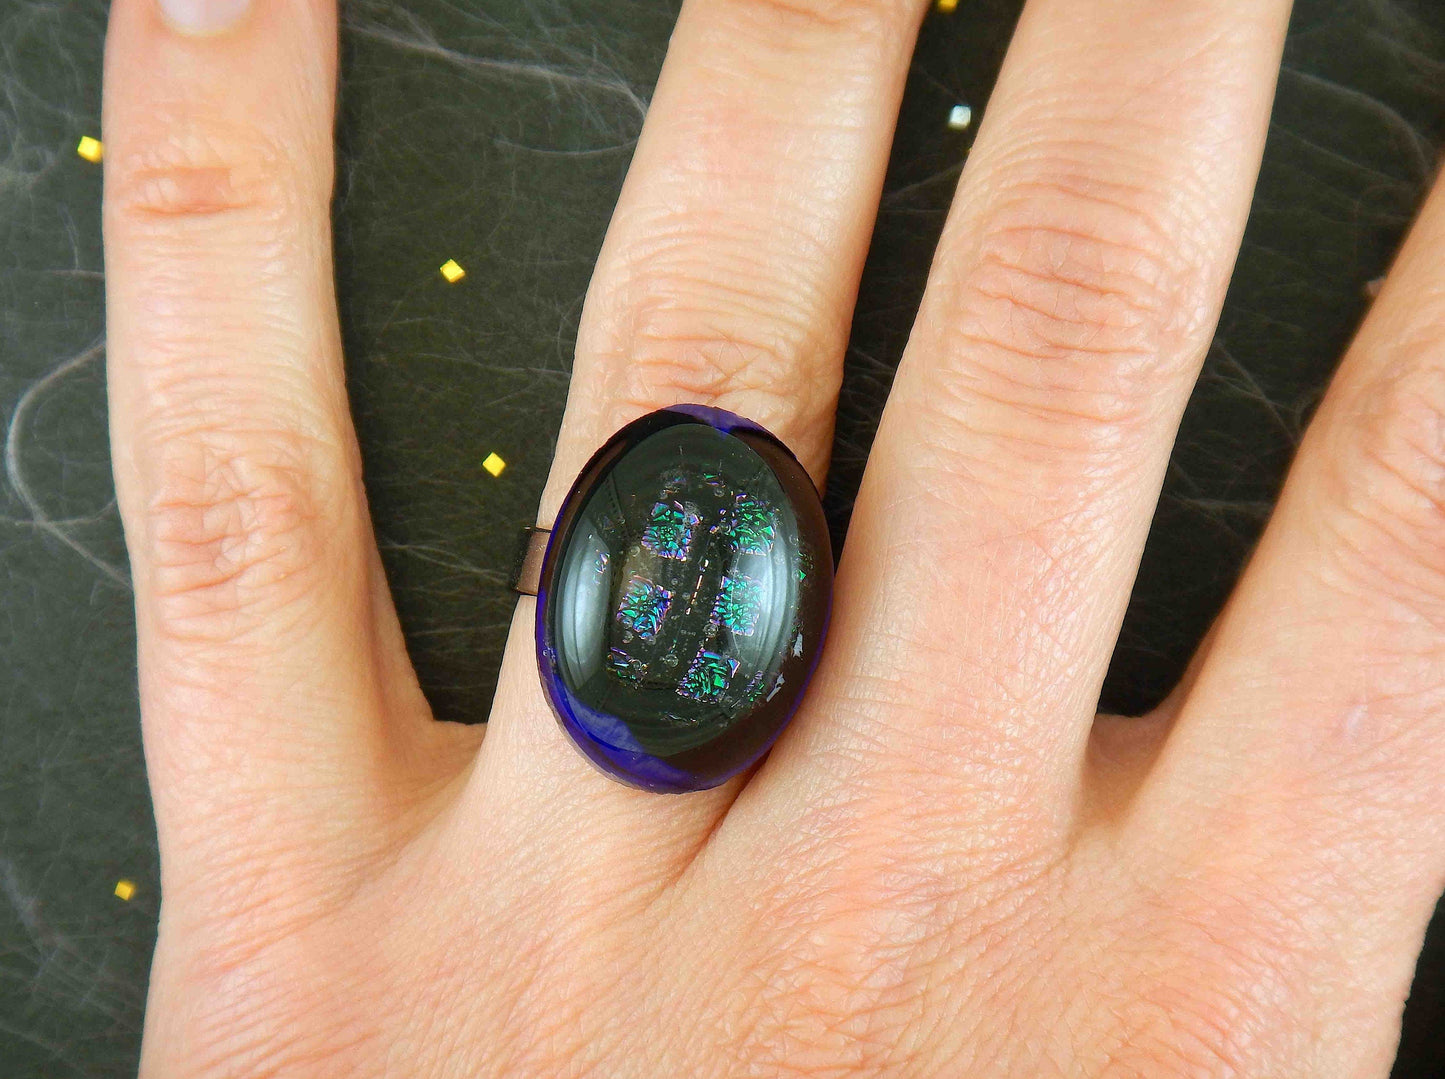 Finger ring with large oval deep violet cabochon (Murano style glass handmade in Montreal), shiny square pattern, stainless steel adjustable base (US 7-8)